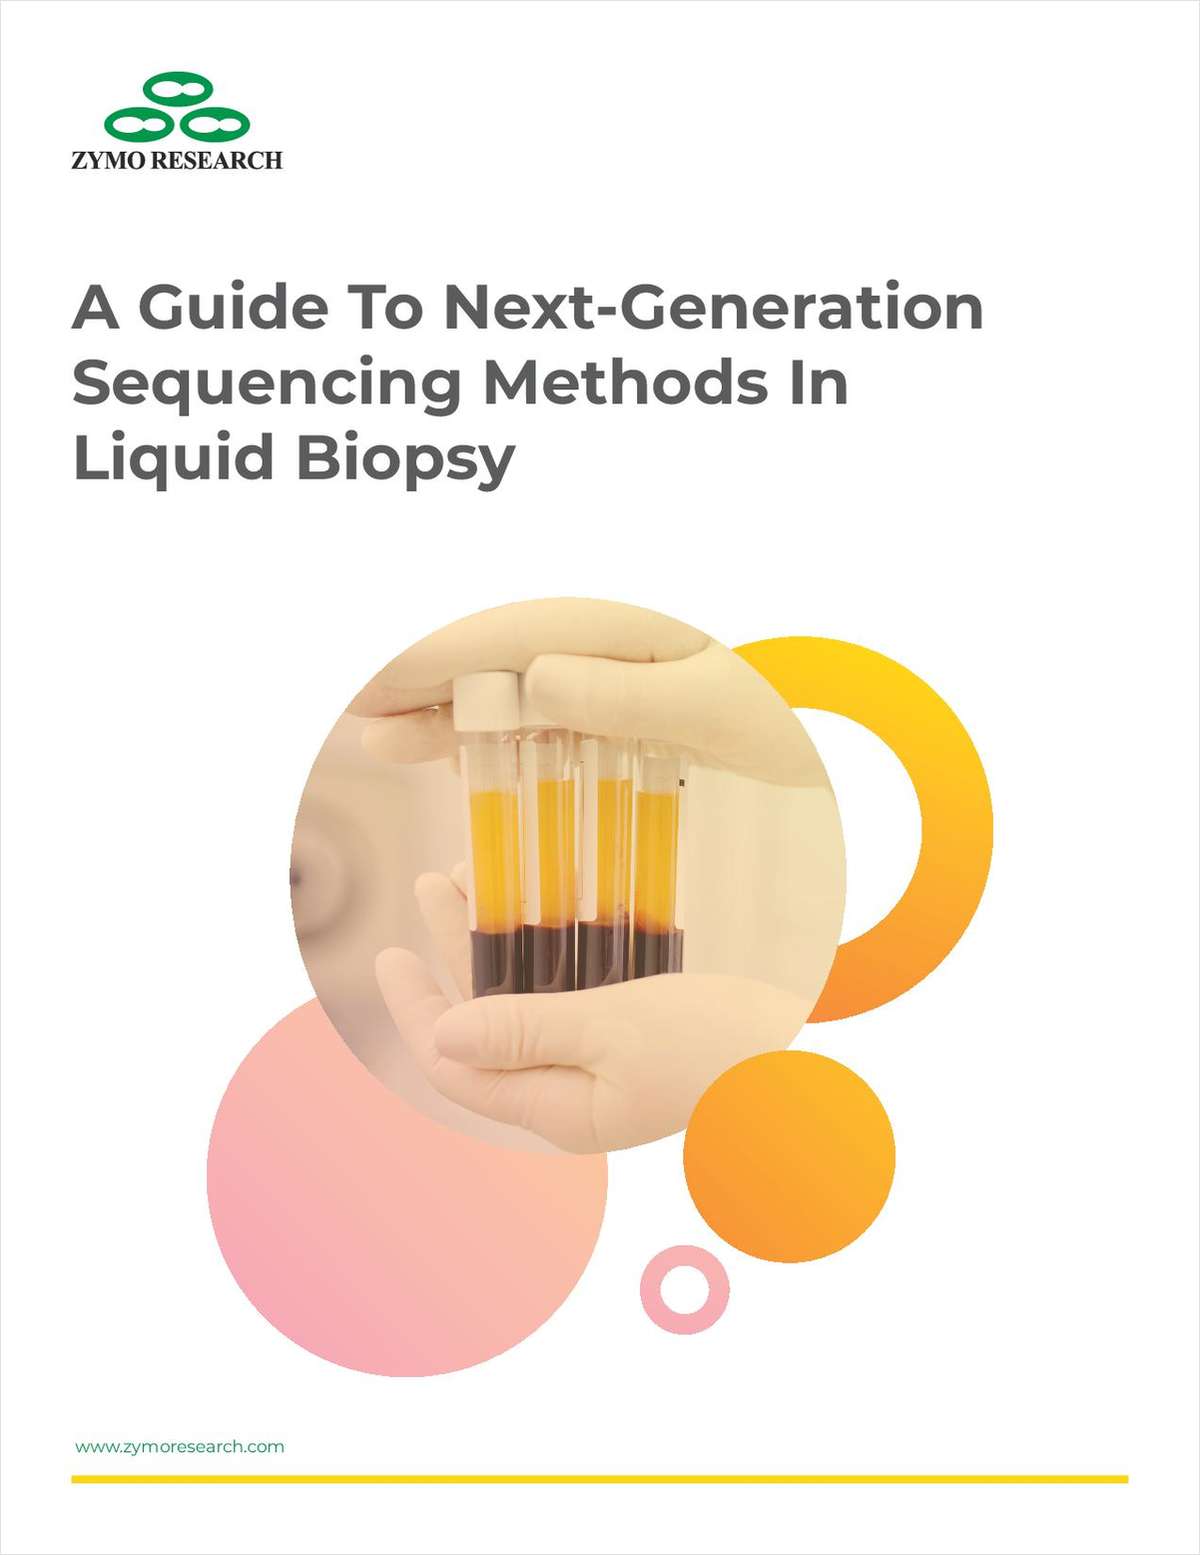 A Guide to Next-Generation Sequencing Methods in Liquid Biopsy